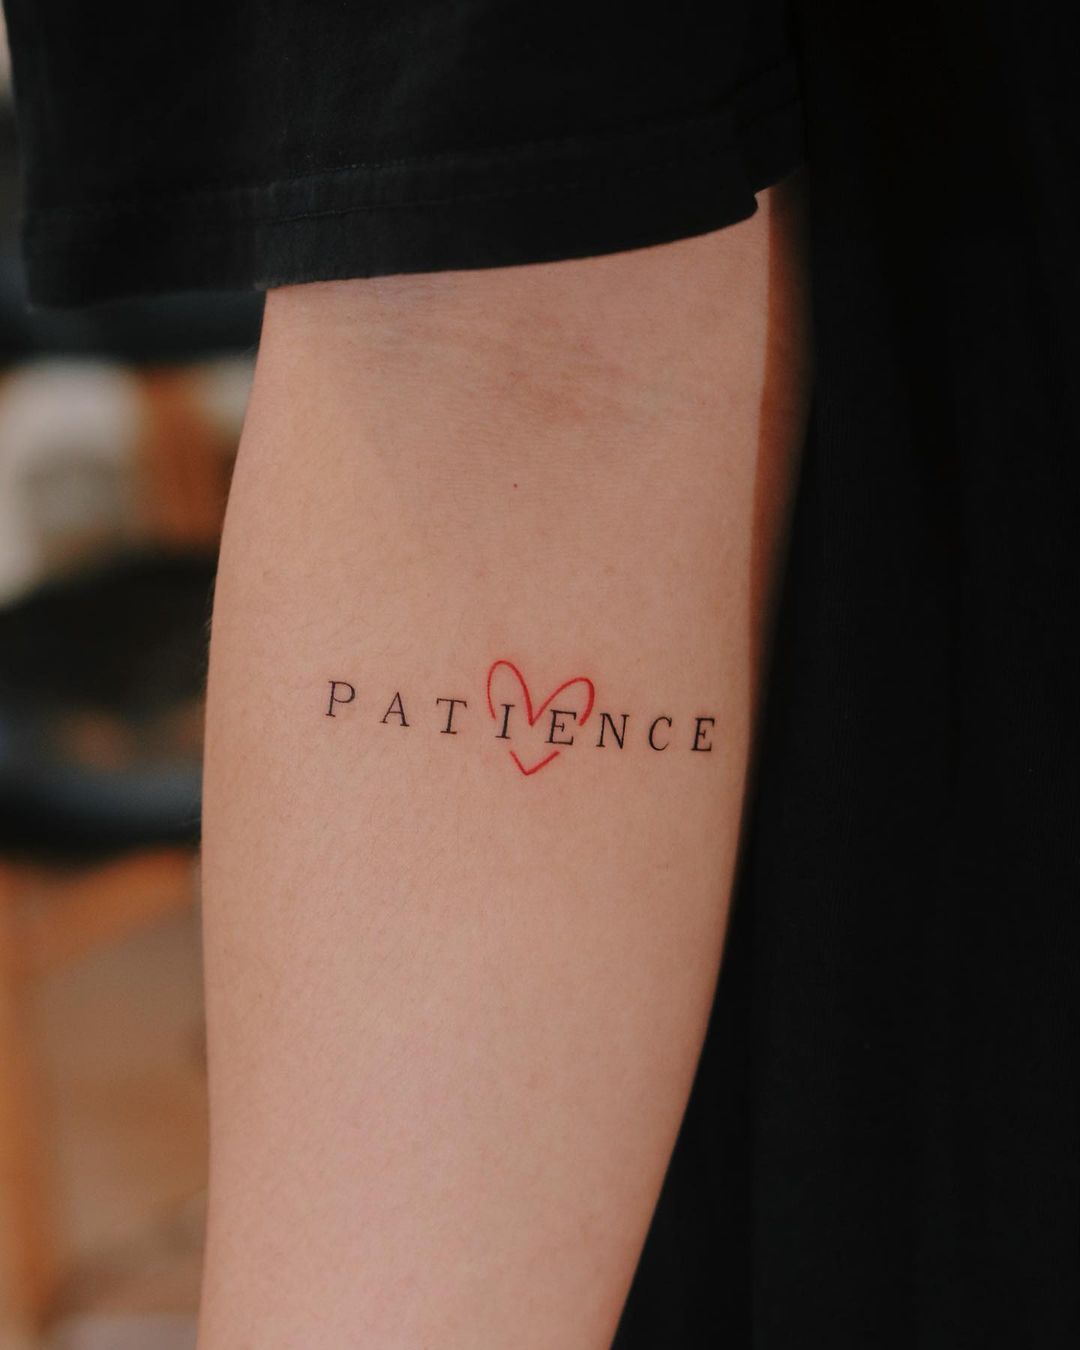 Share 98+ about meaningful one word tattoo super cool .vn